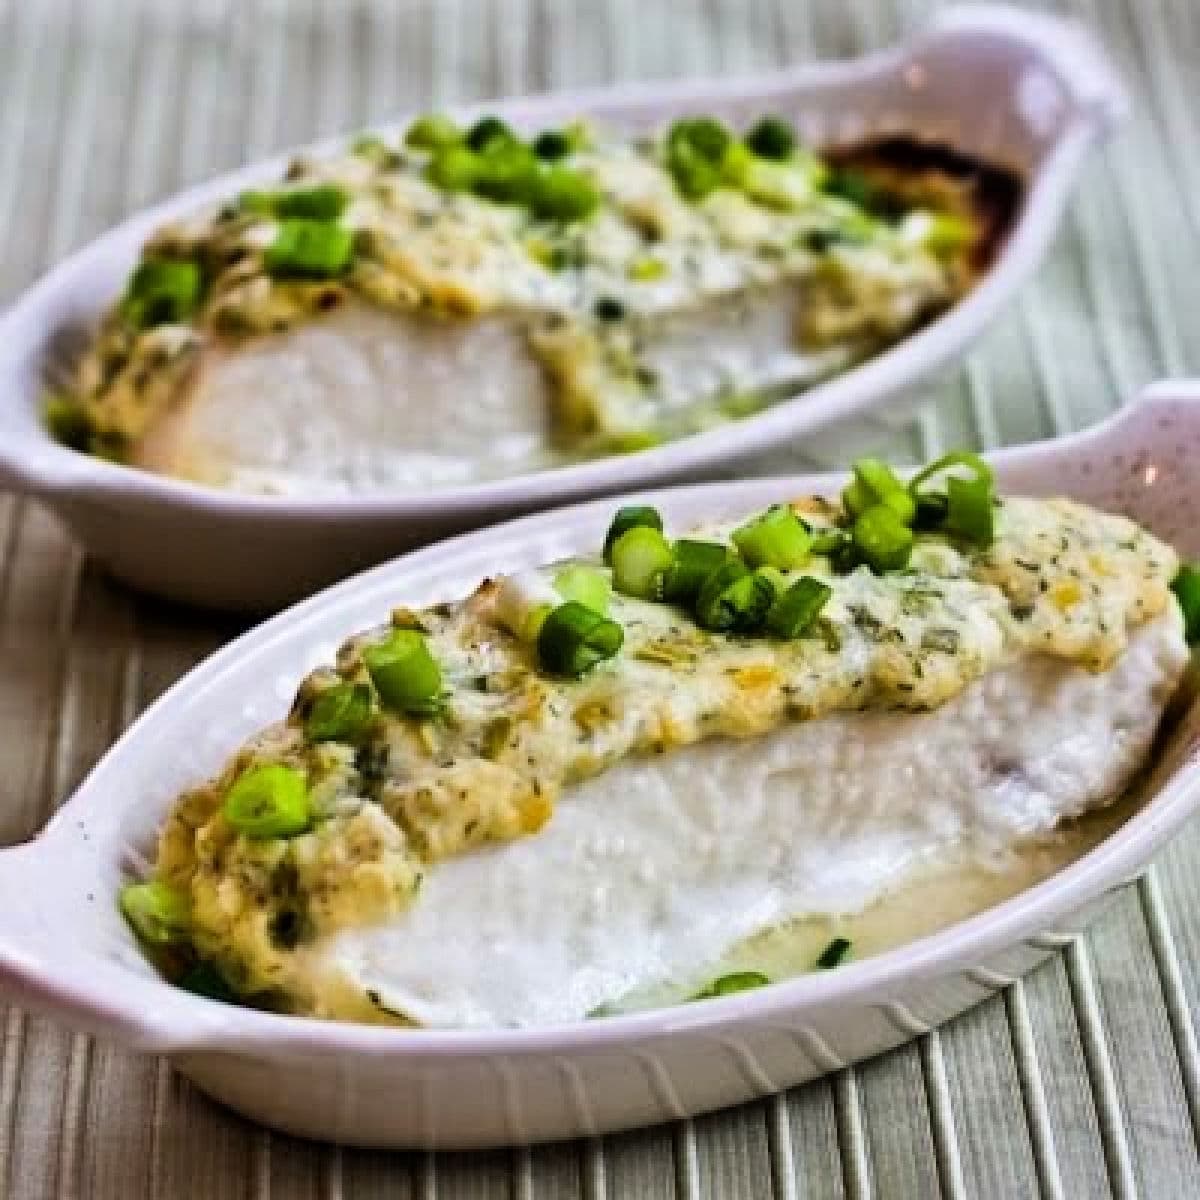 Square image of Baked Halibut with Sour Cream, Parmesan, and Dill Topping shown in two gratin dishes.